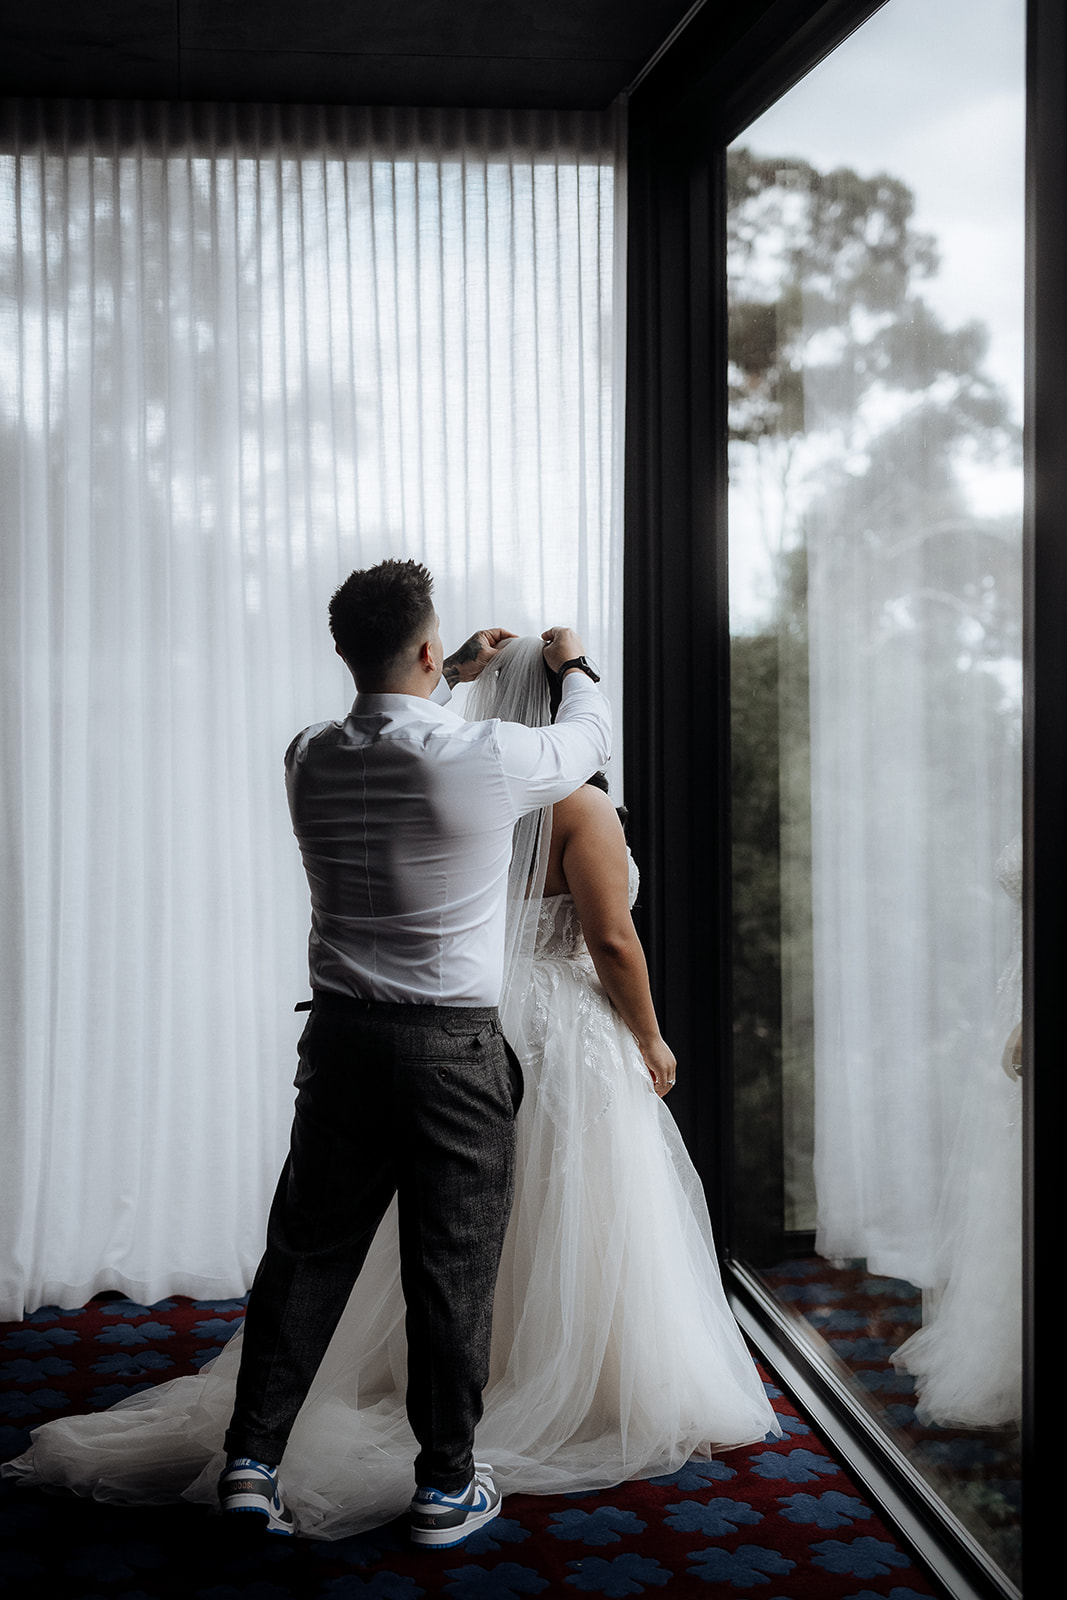 A groom fits the bride's veil as they are getting ready for their elopement in an Airbnb in Hobart, Tasmania